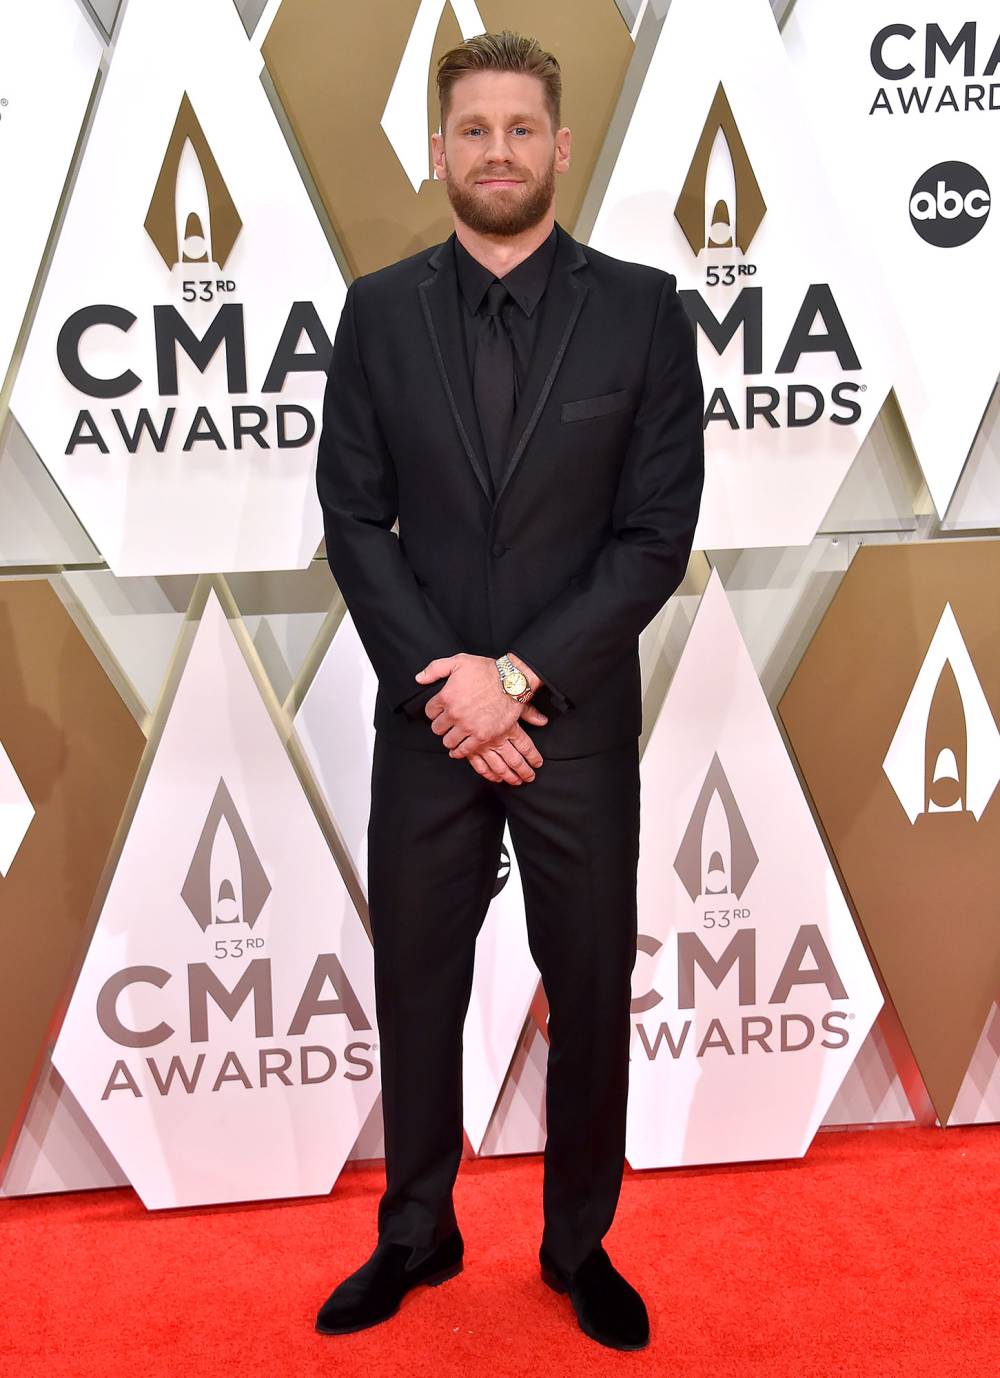 Chase Rice 53rd Annual CMA Awards Opens Up About Bad Breakup